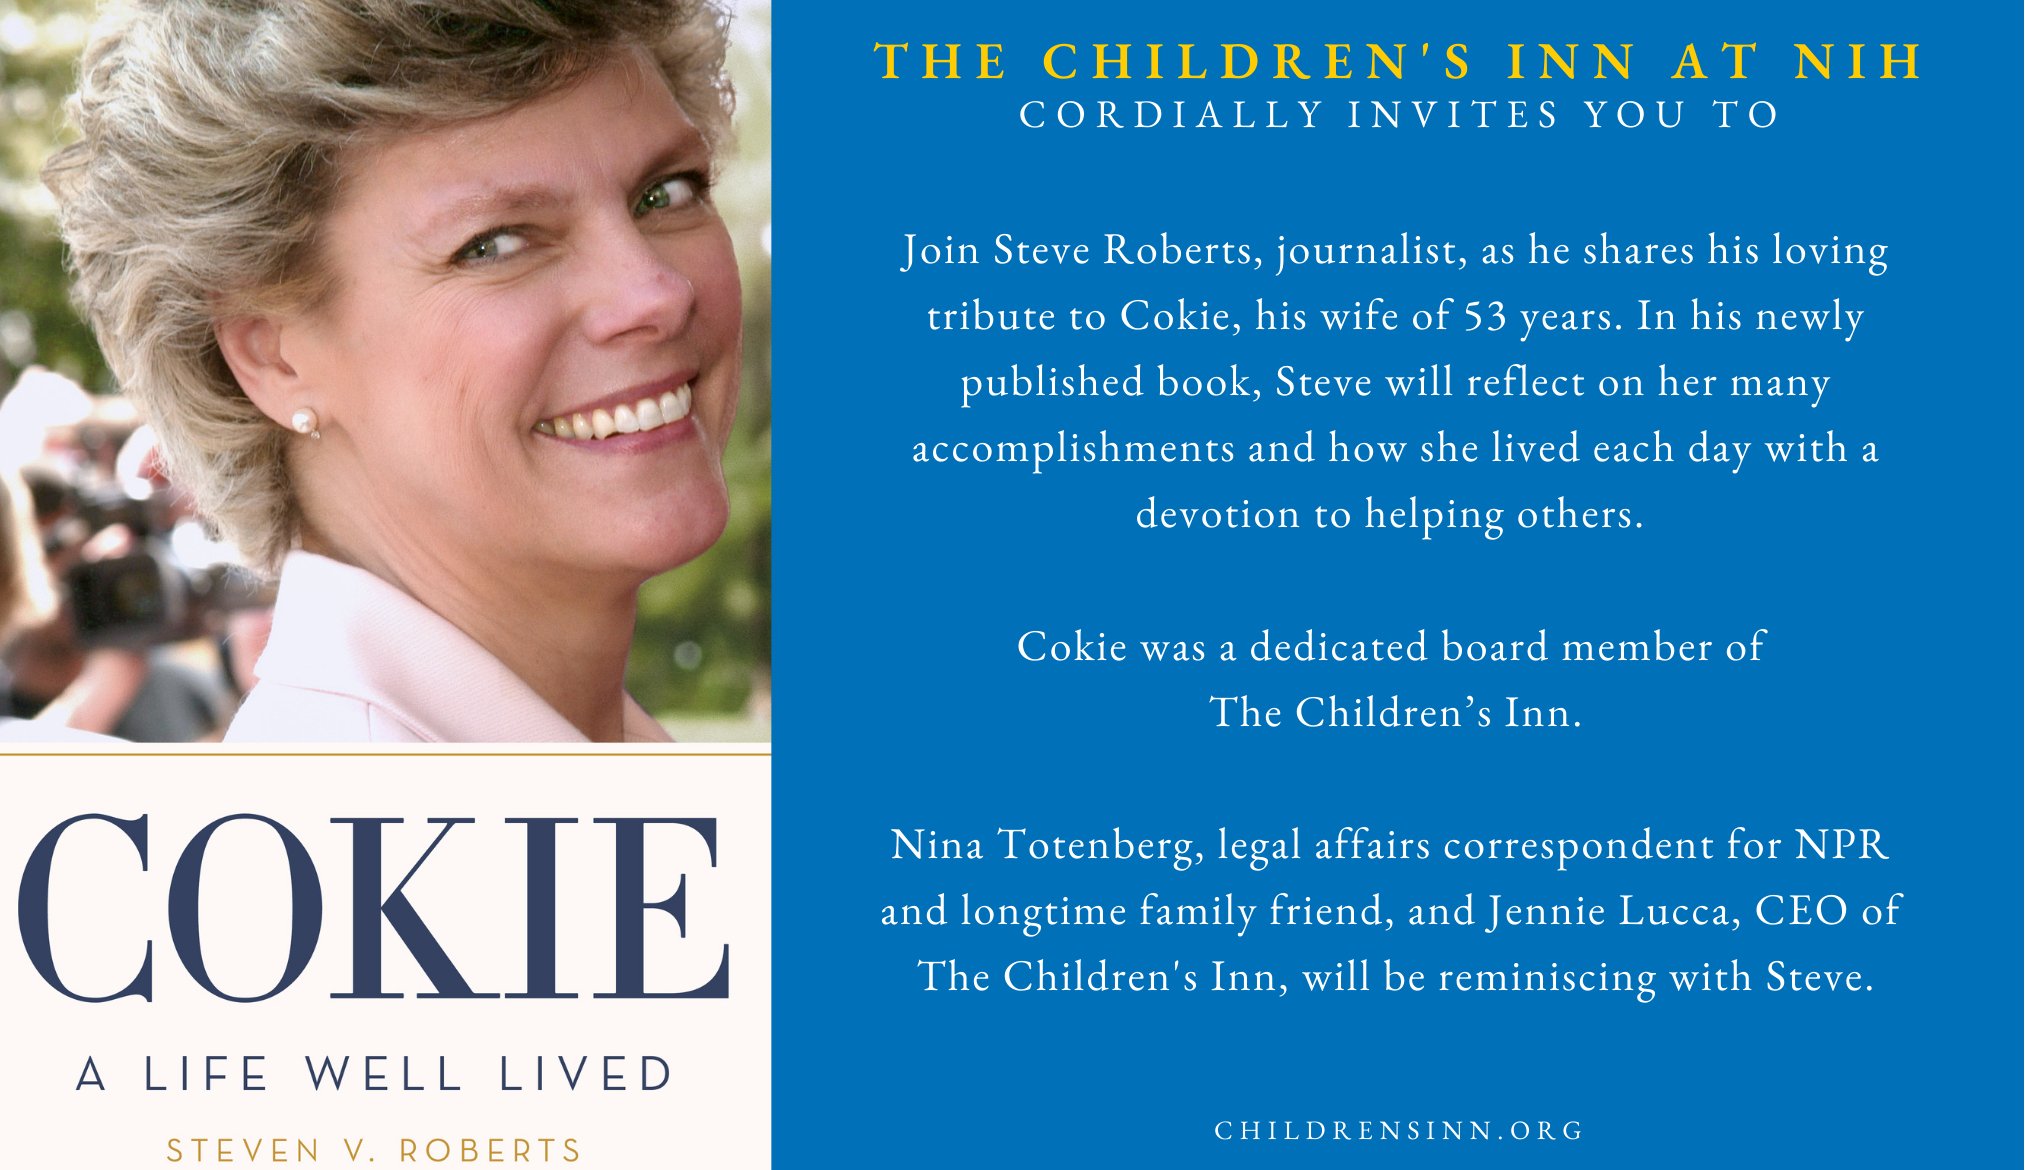 Cokie Roberts: A Life Well Lived